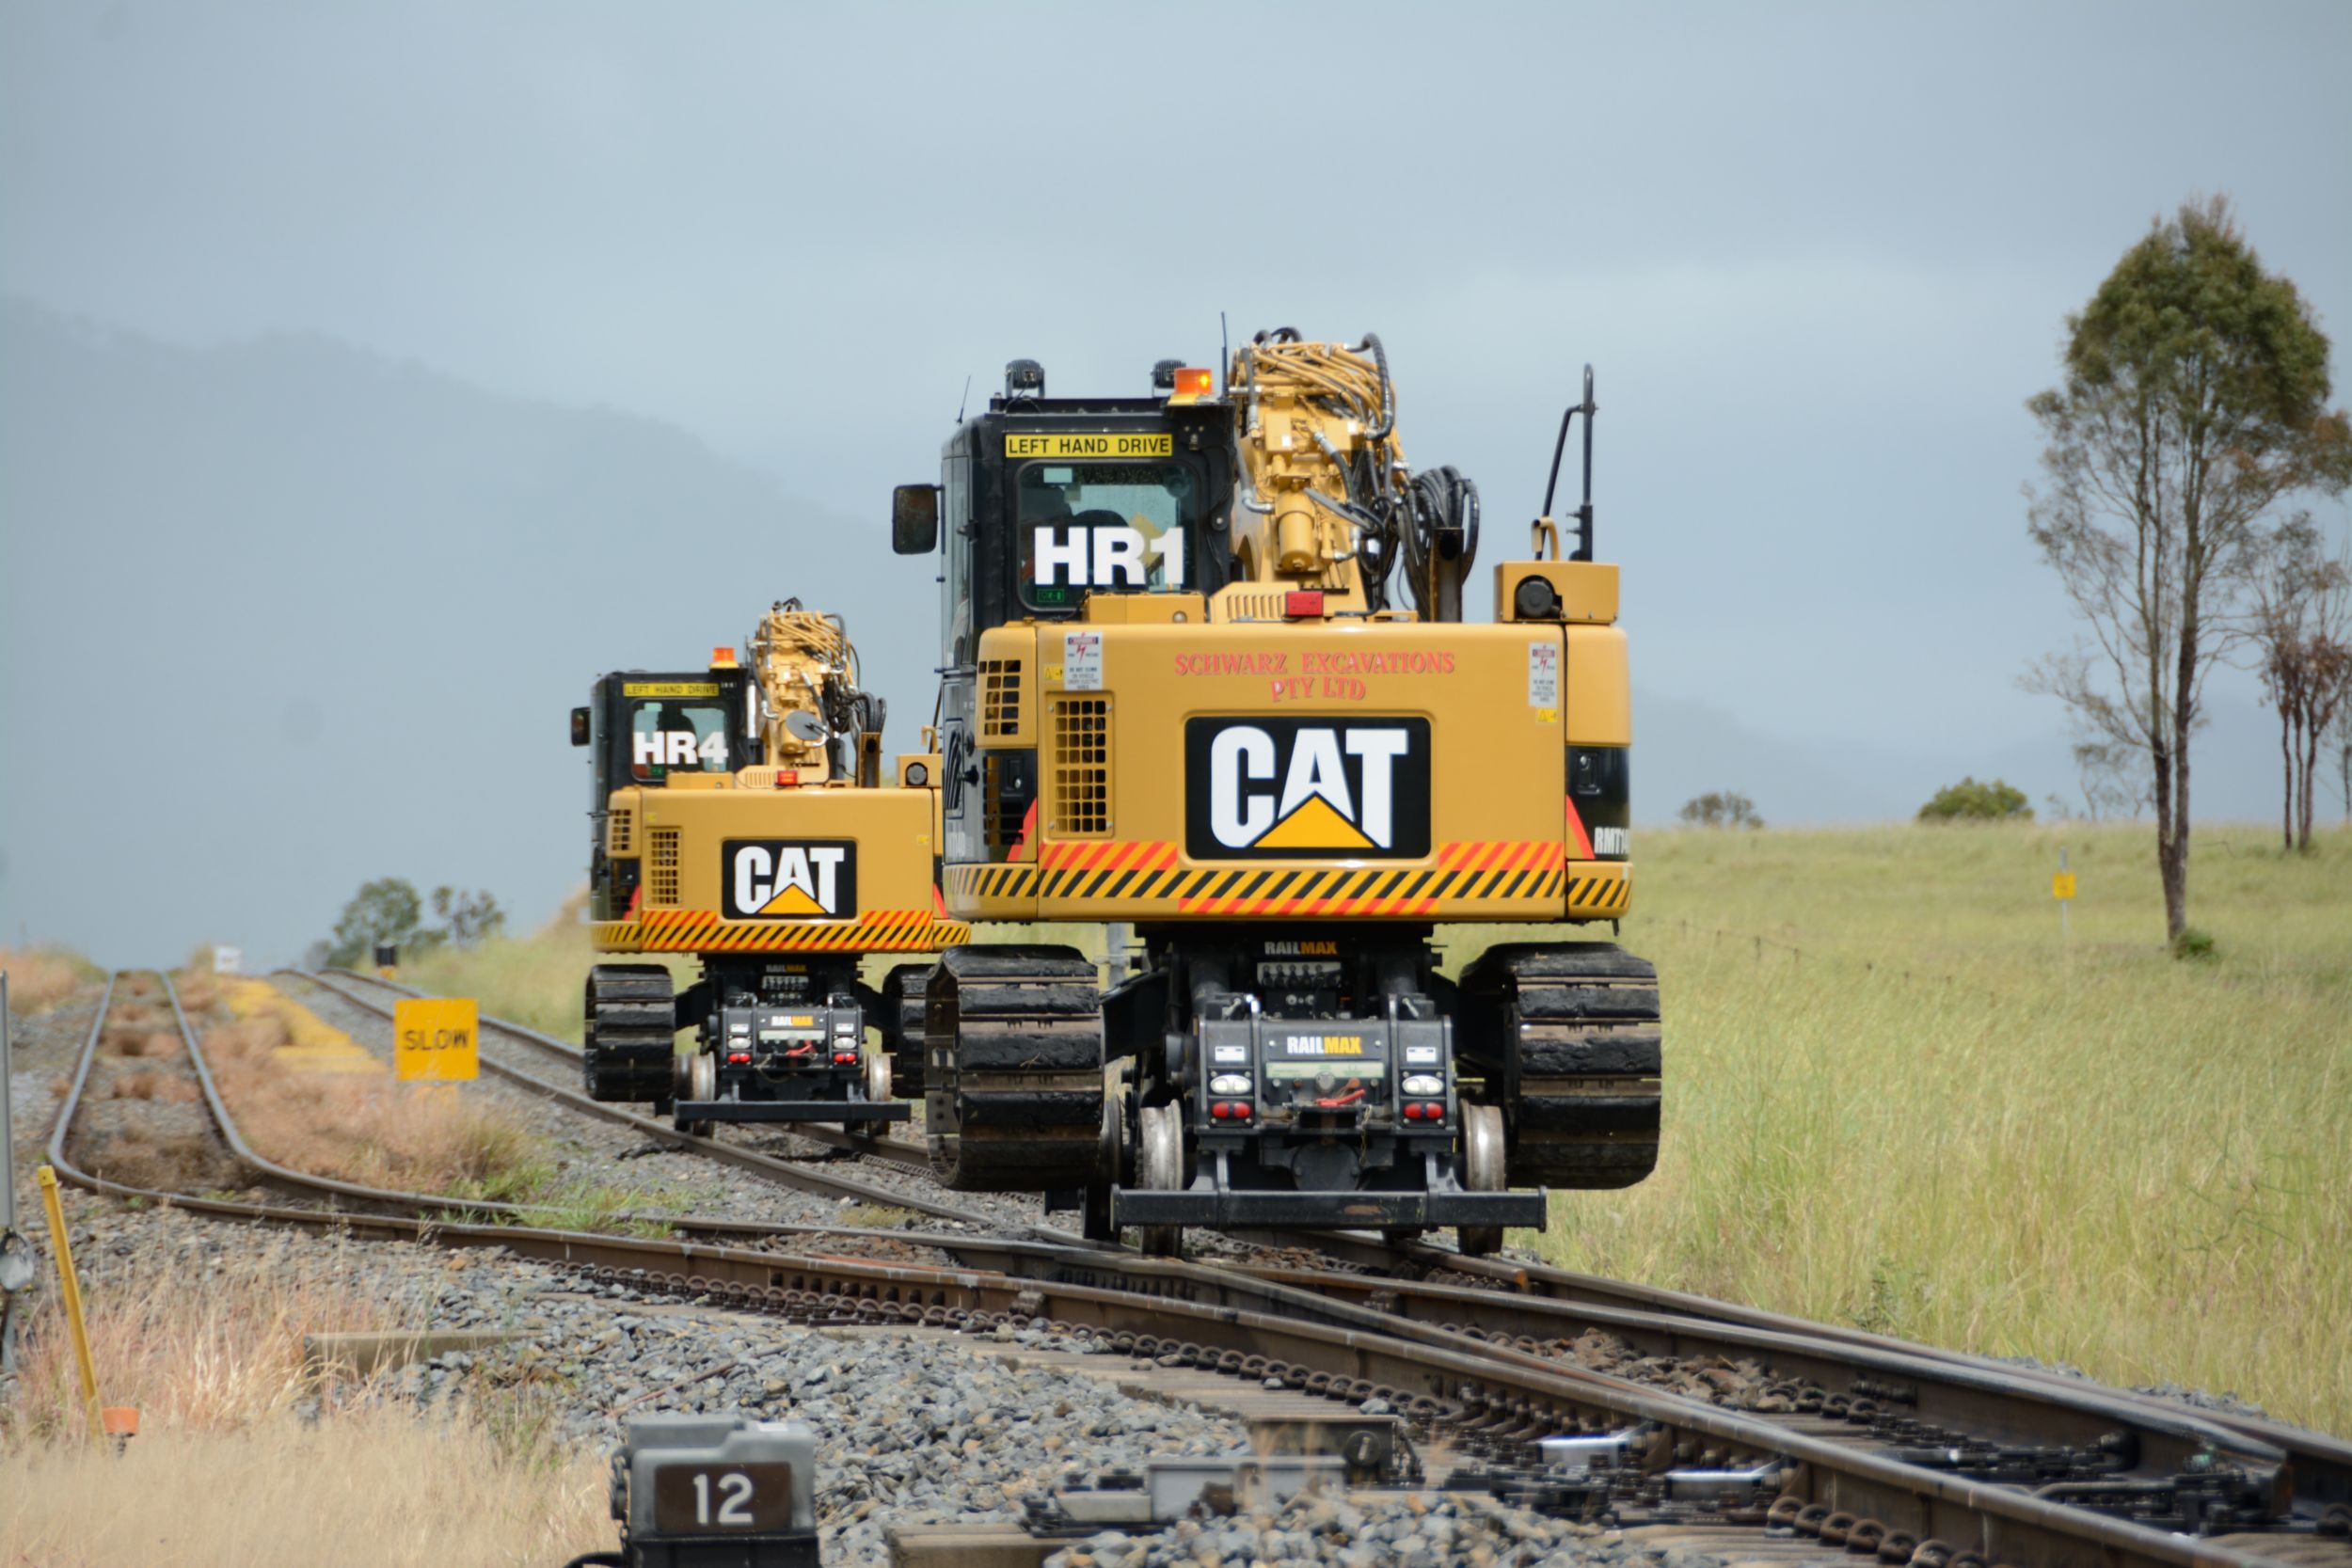 “The high rail machines have enabled us to get on track at the specified time; cut out a specific section of track bed within a certain amount time; and have it all completed and be off track quickly.”